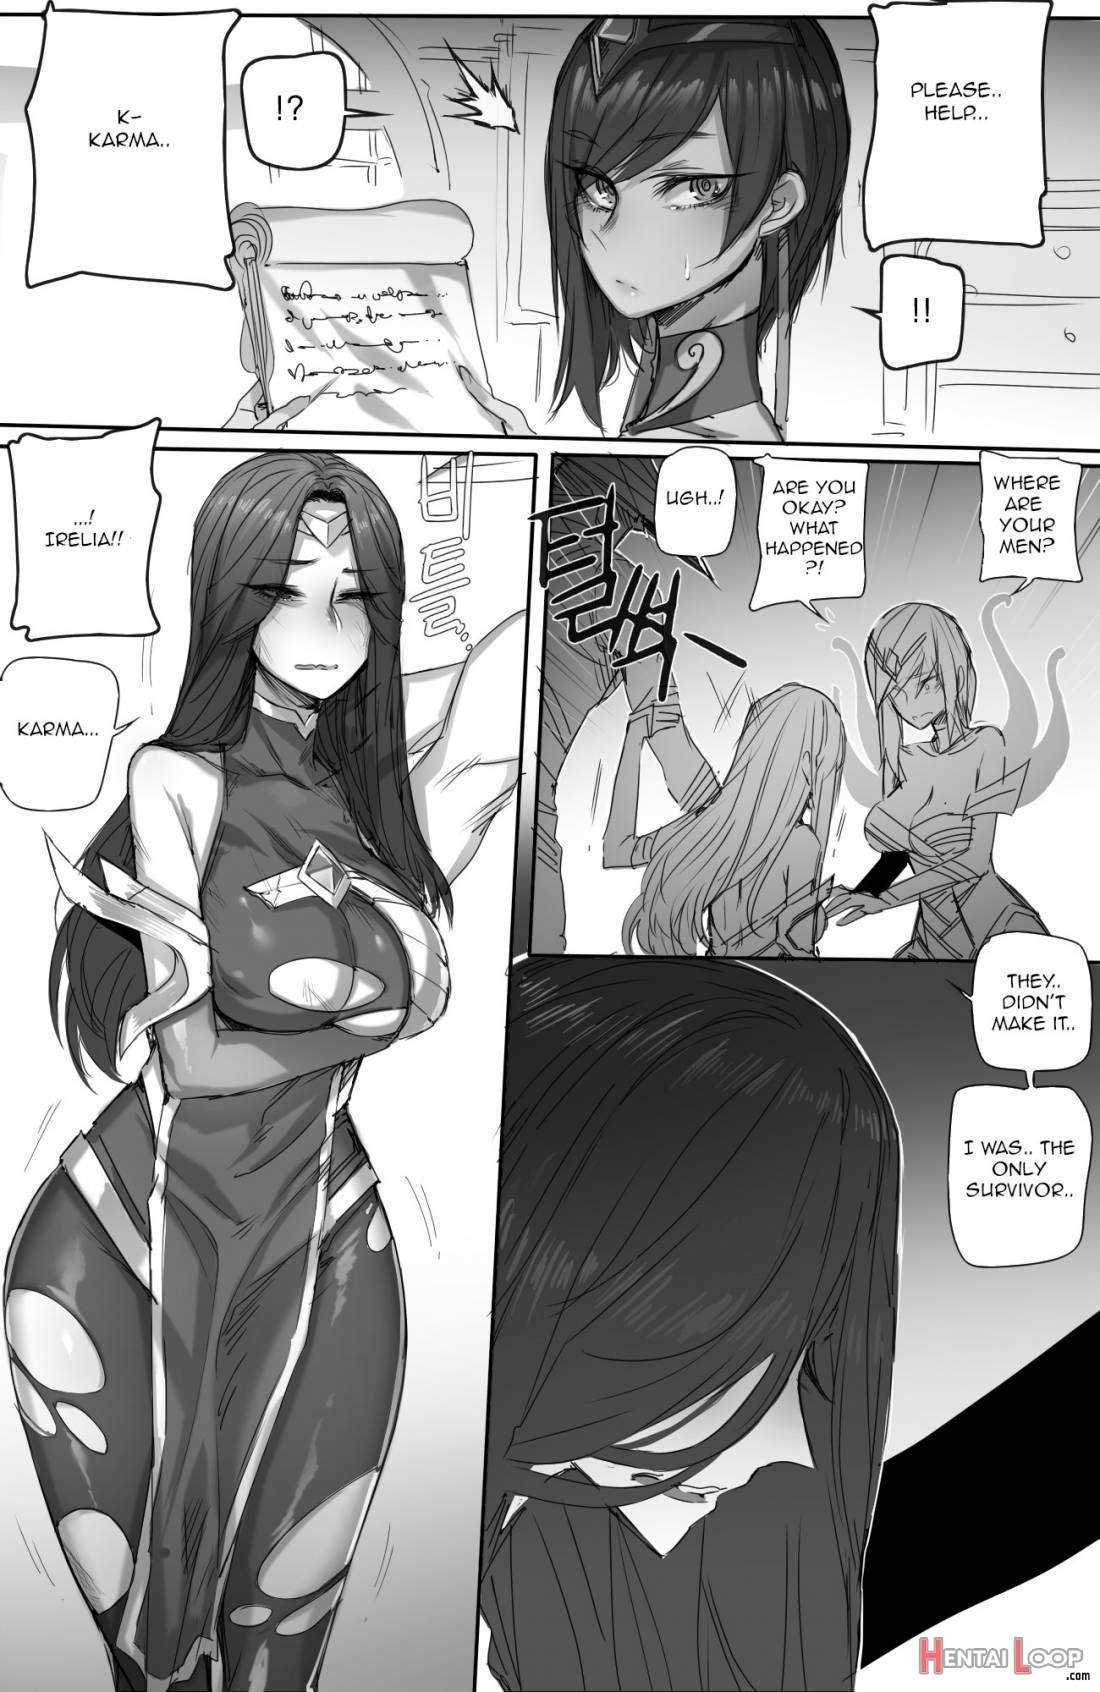 For the Noxus page 2